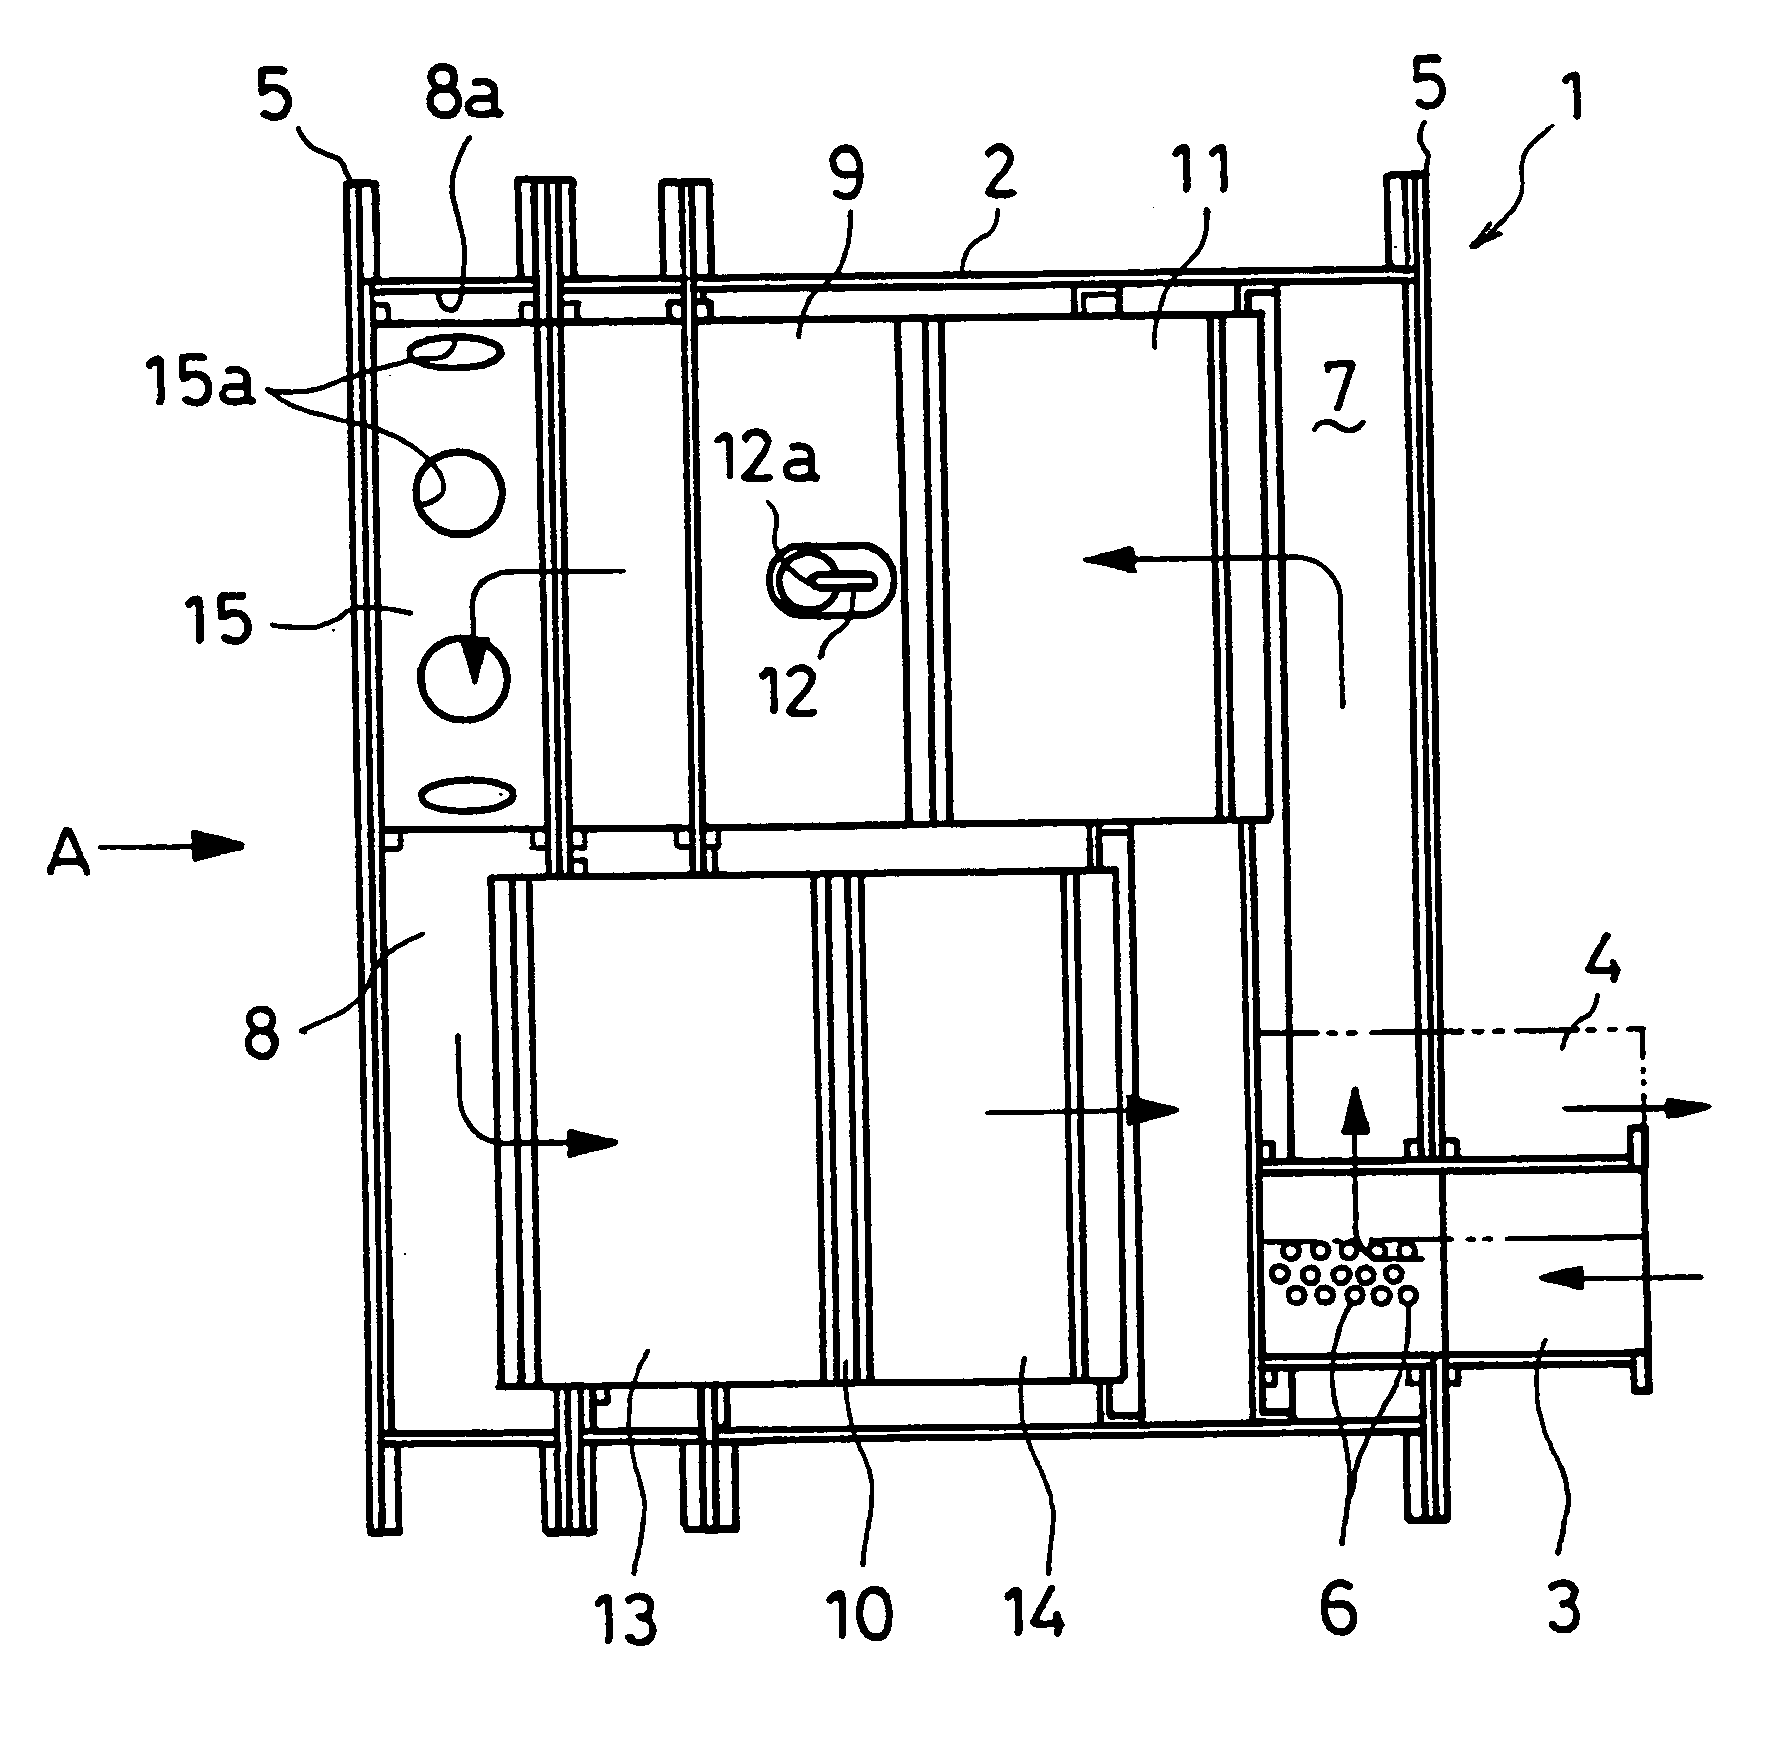 Muffling apparatus having exhaust emission purifying function